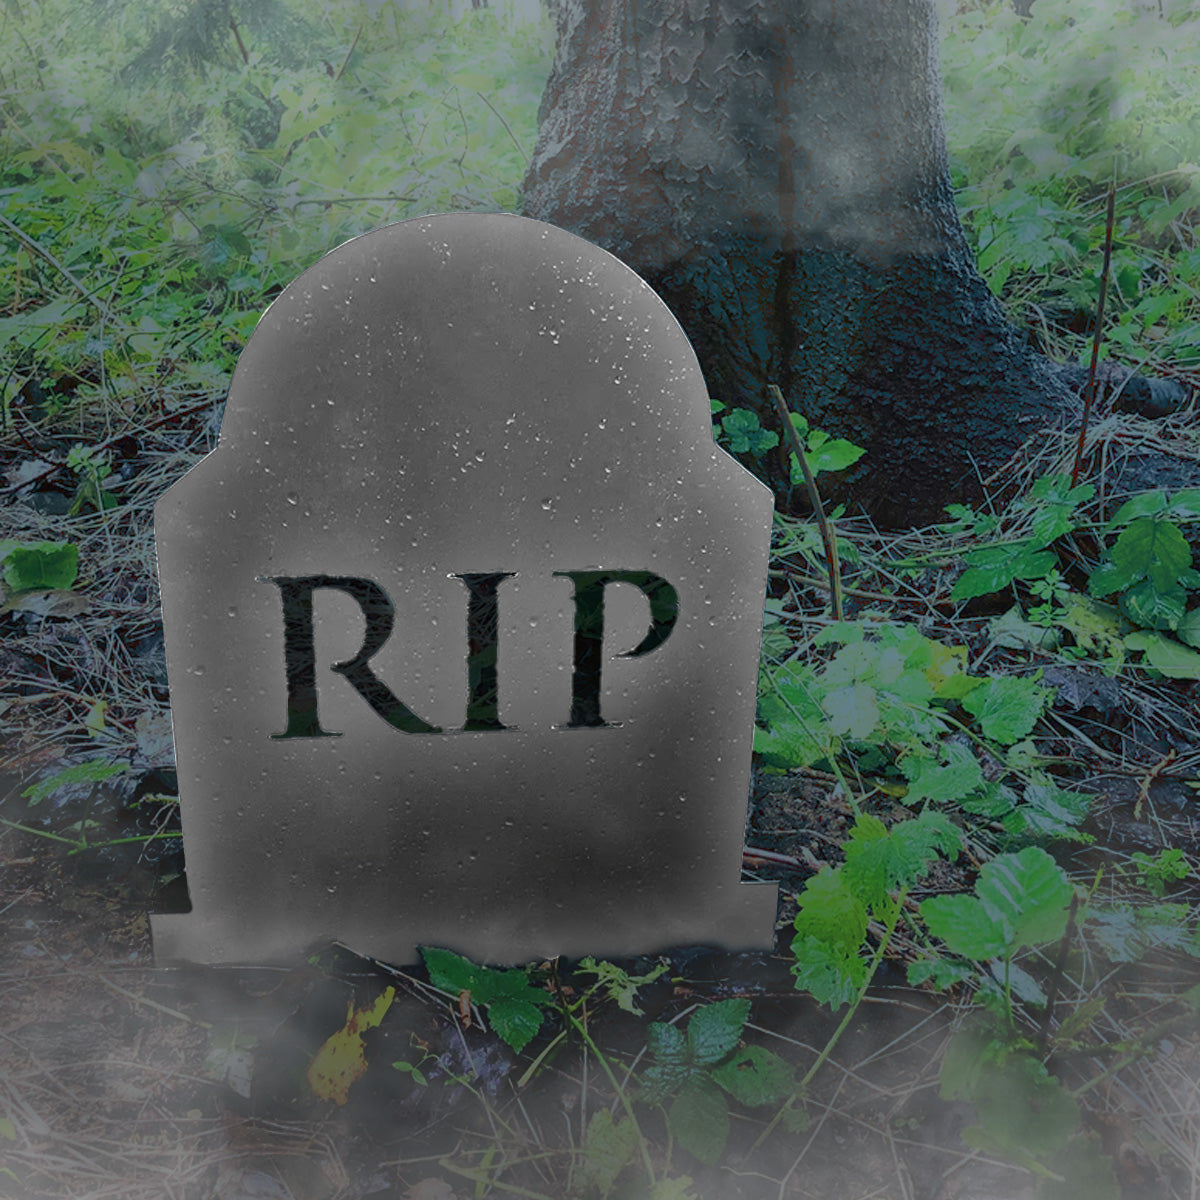 Halloween Tombstone Graveyard Decoration - Turn Your Garden into a Spooky Cemetery